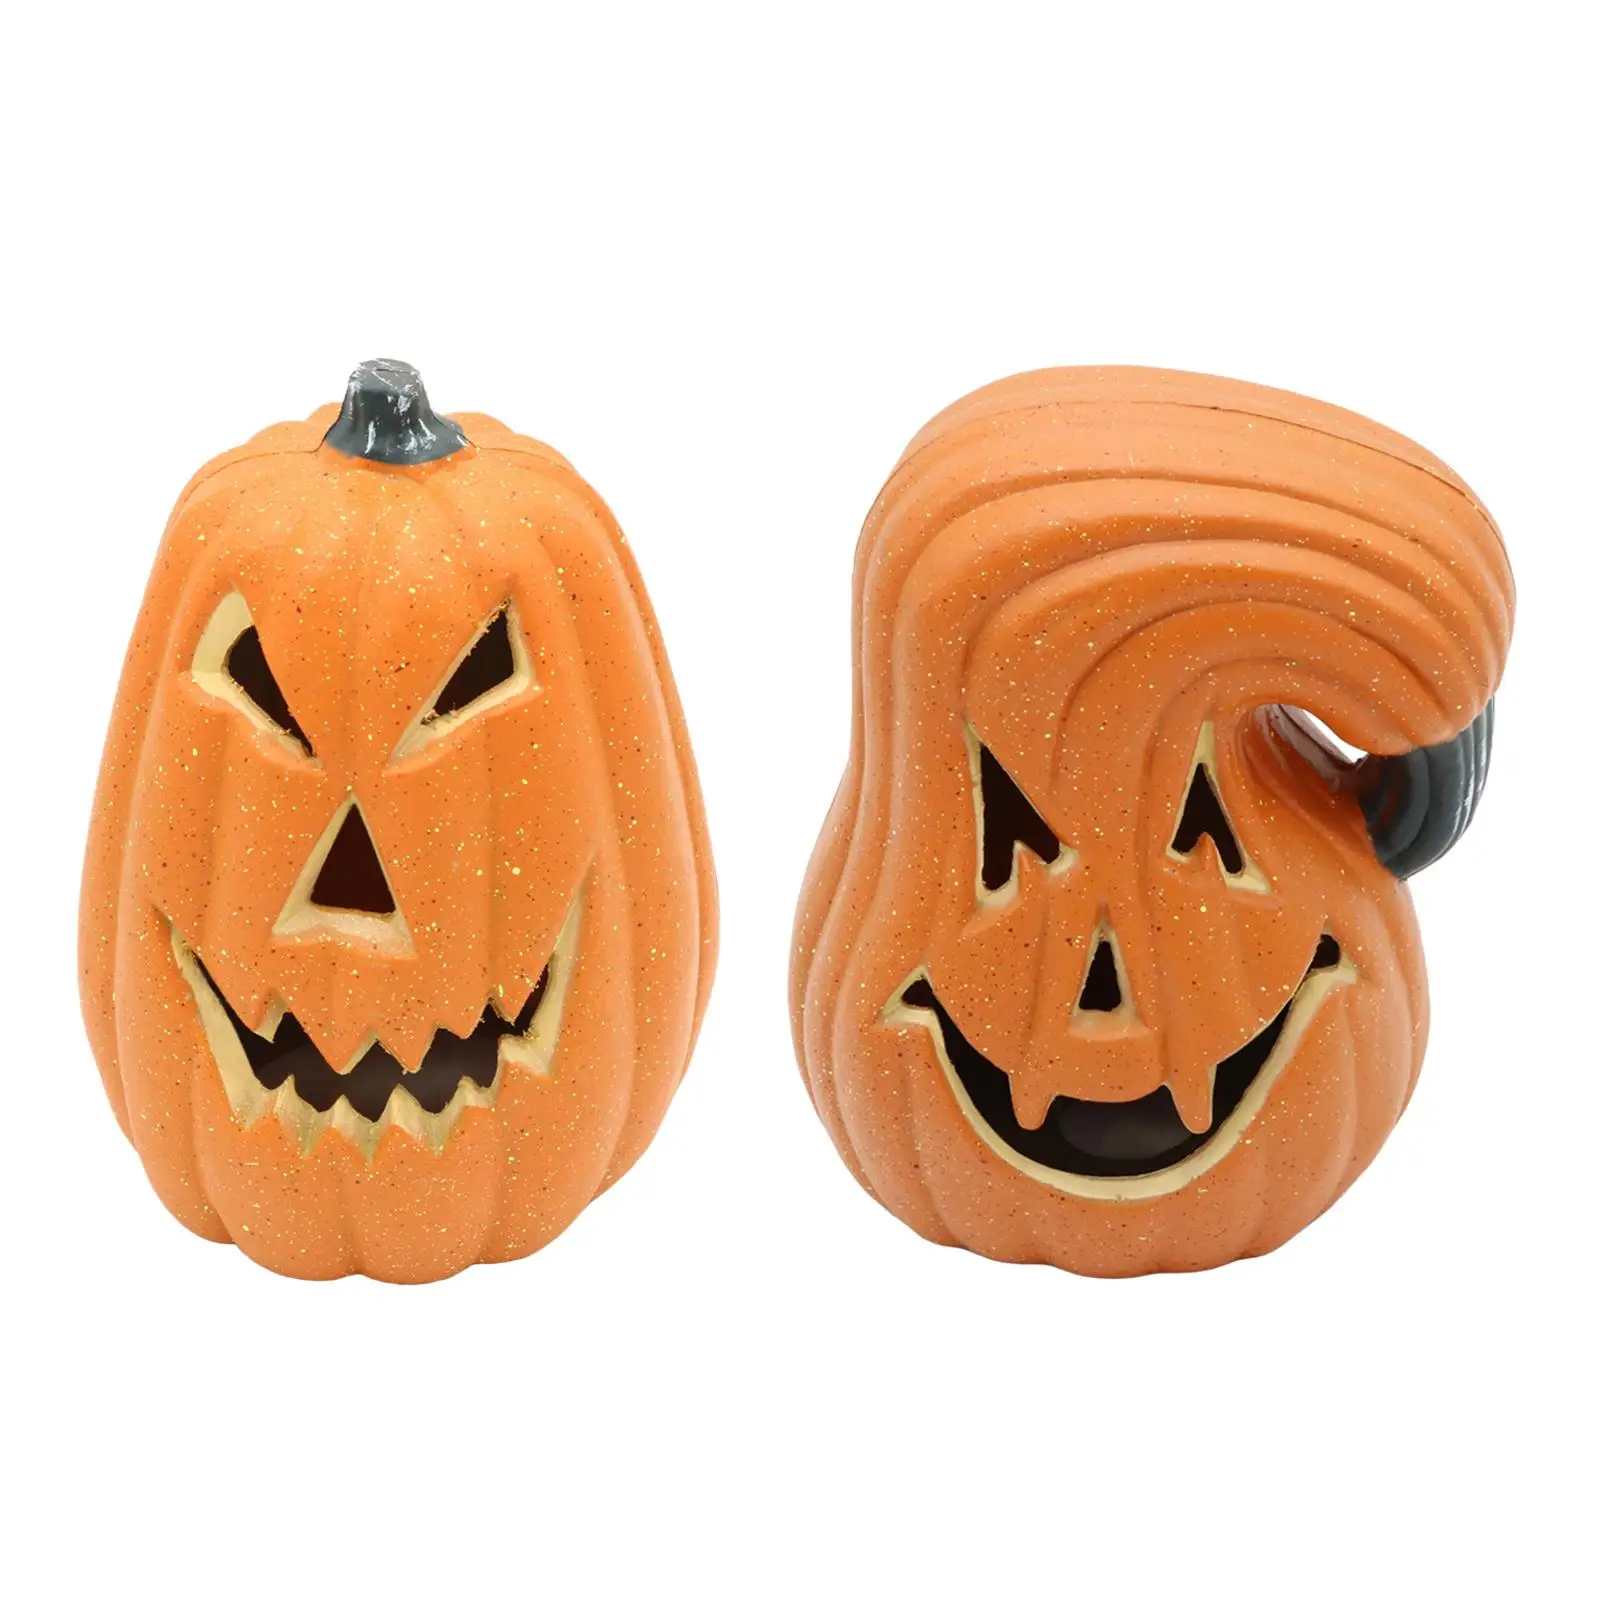 Halloween Artificial Pumpkins for Holiday Festival Decoration Table Centerpiece